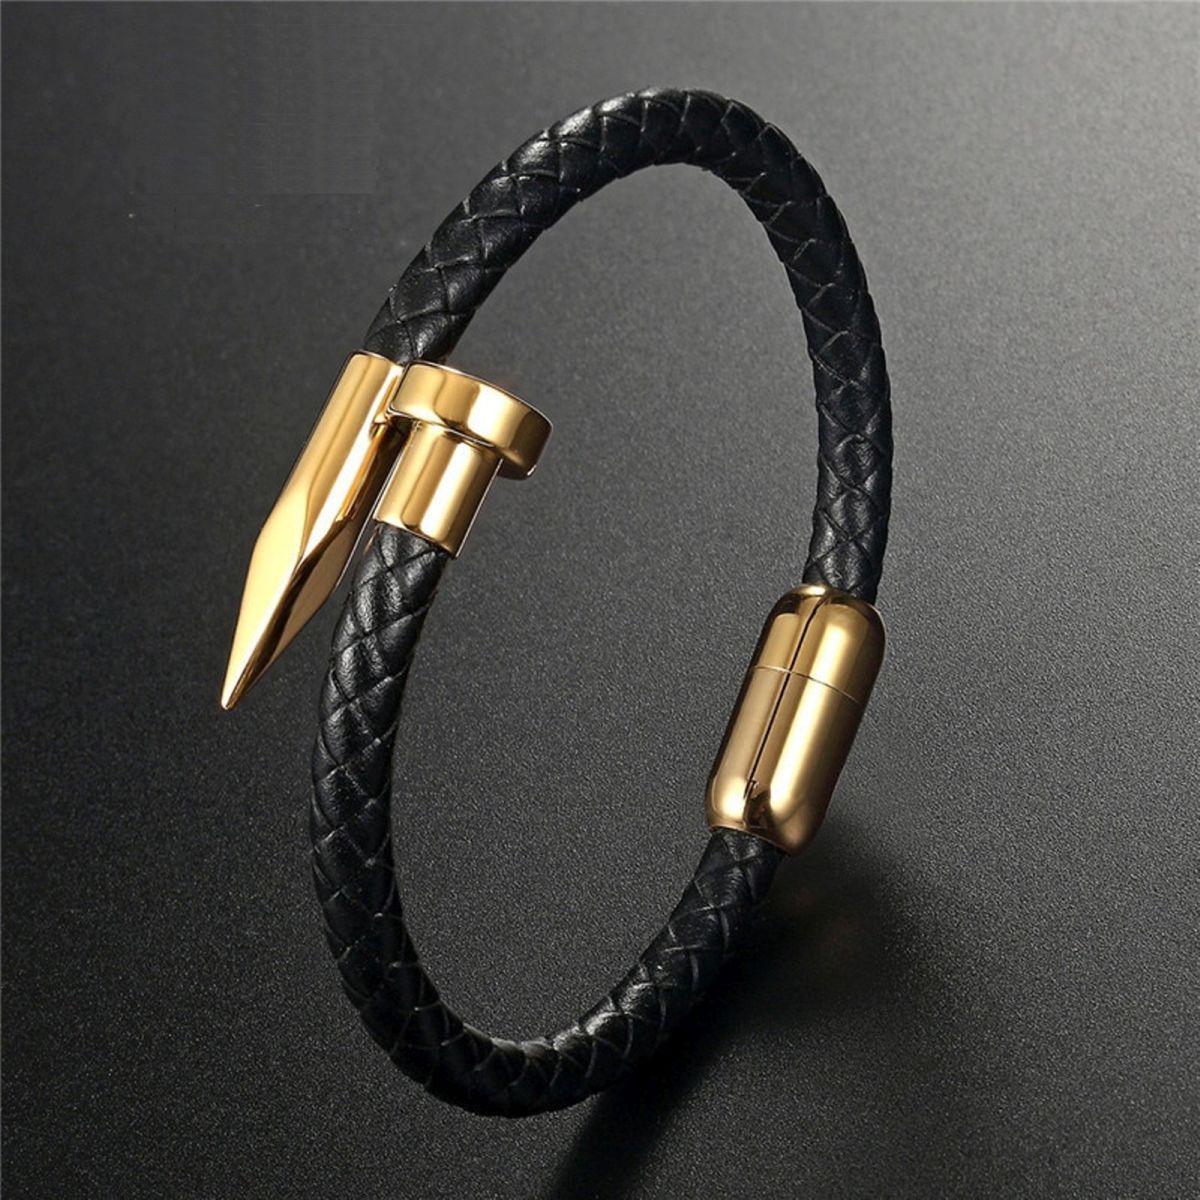 Gold Color Stainless Steel Leather Bracelet Men 18mm Wide Mens Leather  Bracelets Jewelry Wristband Engraveable Dropshipping Gift - Bracelets -  AliExpress